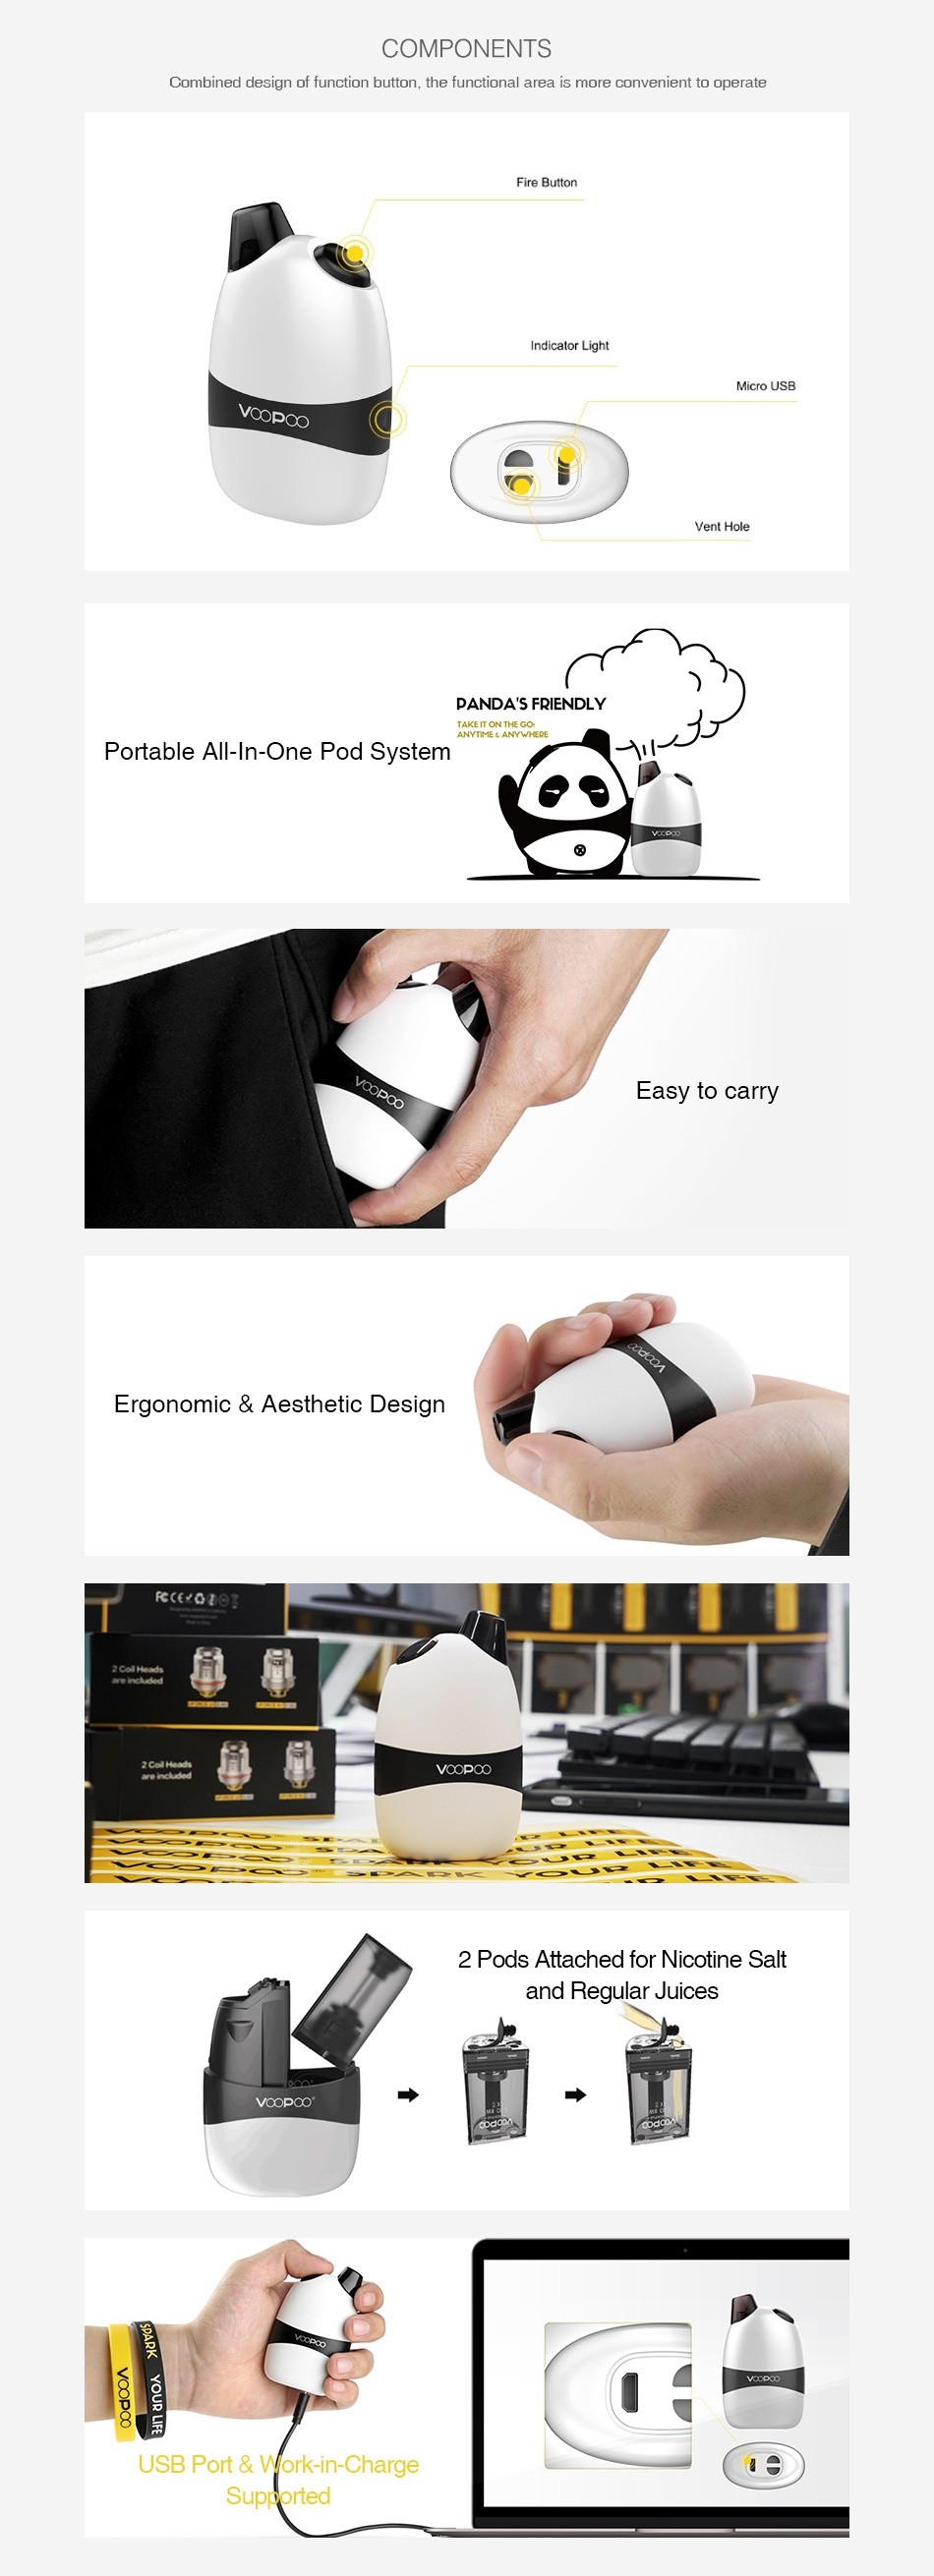 VOOPOO Panda AIO Pod Kit 1100mAh COMPONENTS Combined design ot function button  the functional area is more convenient to operate Fire Burton Micro us  Went Hole PANDAS FRIENDLY Portable All In One Pod System Ergonomic Aesthetic Design RcEYOIO  2 Pods Attached for nicotine salt and reqular Juices     USB Port vork in Charge Supported